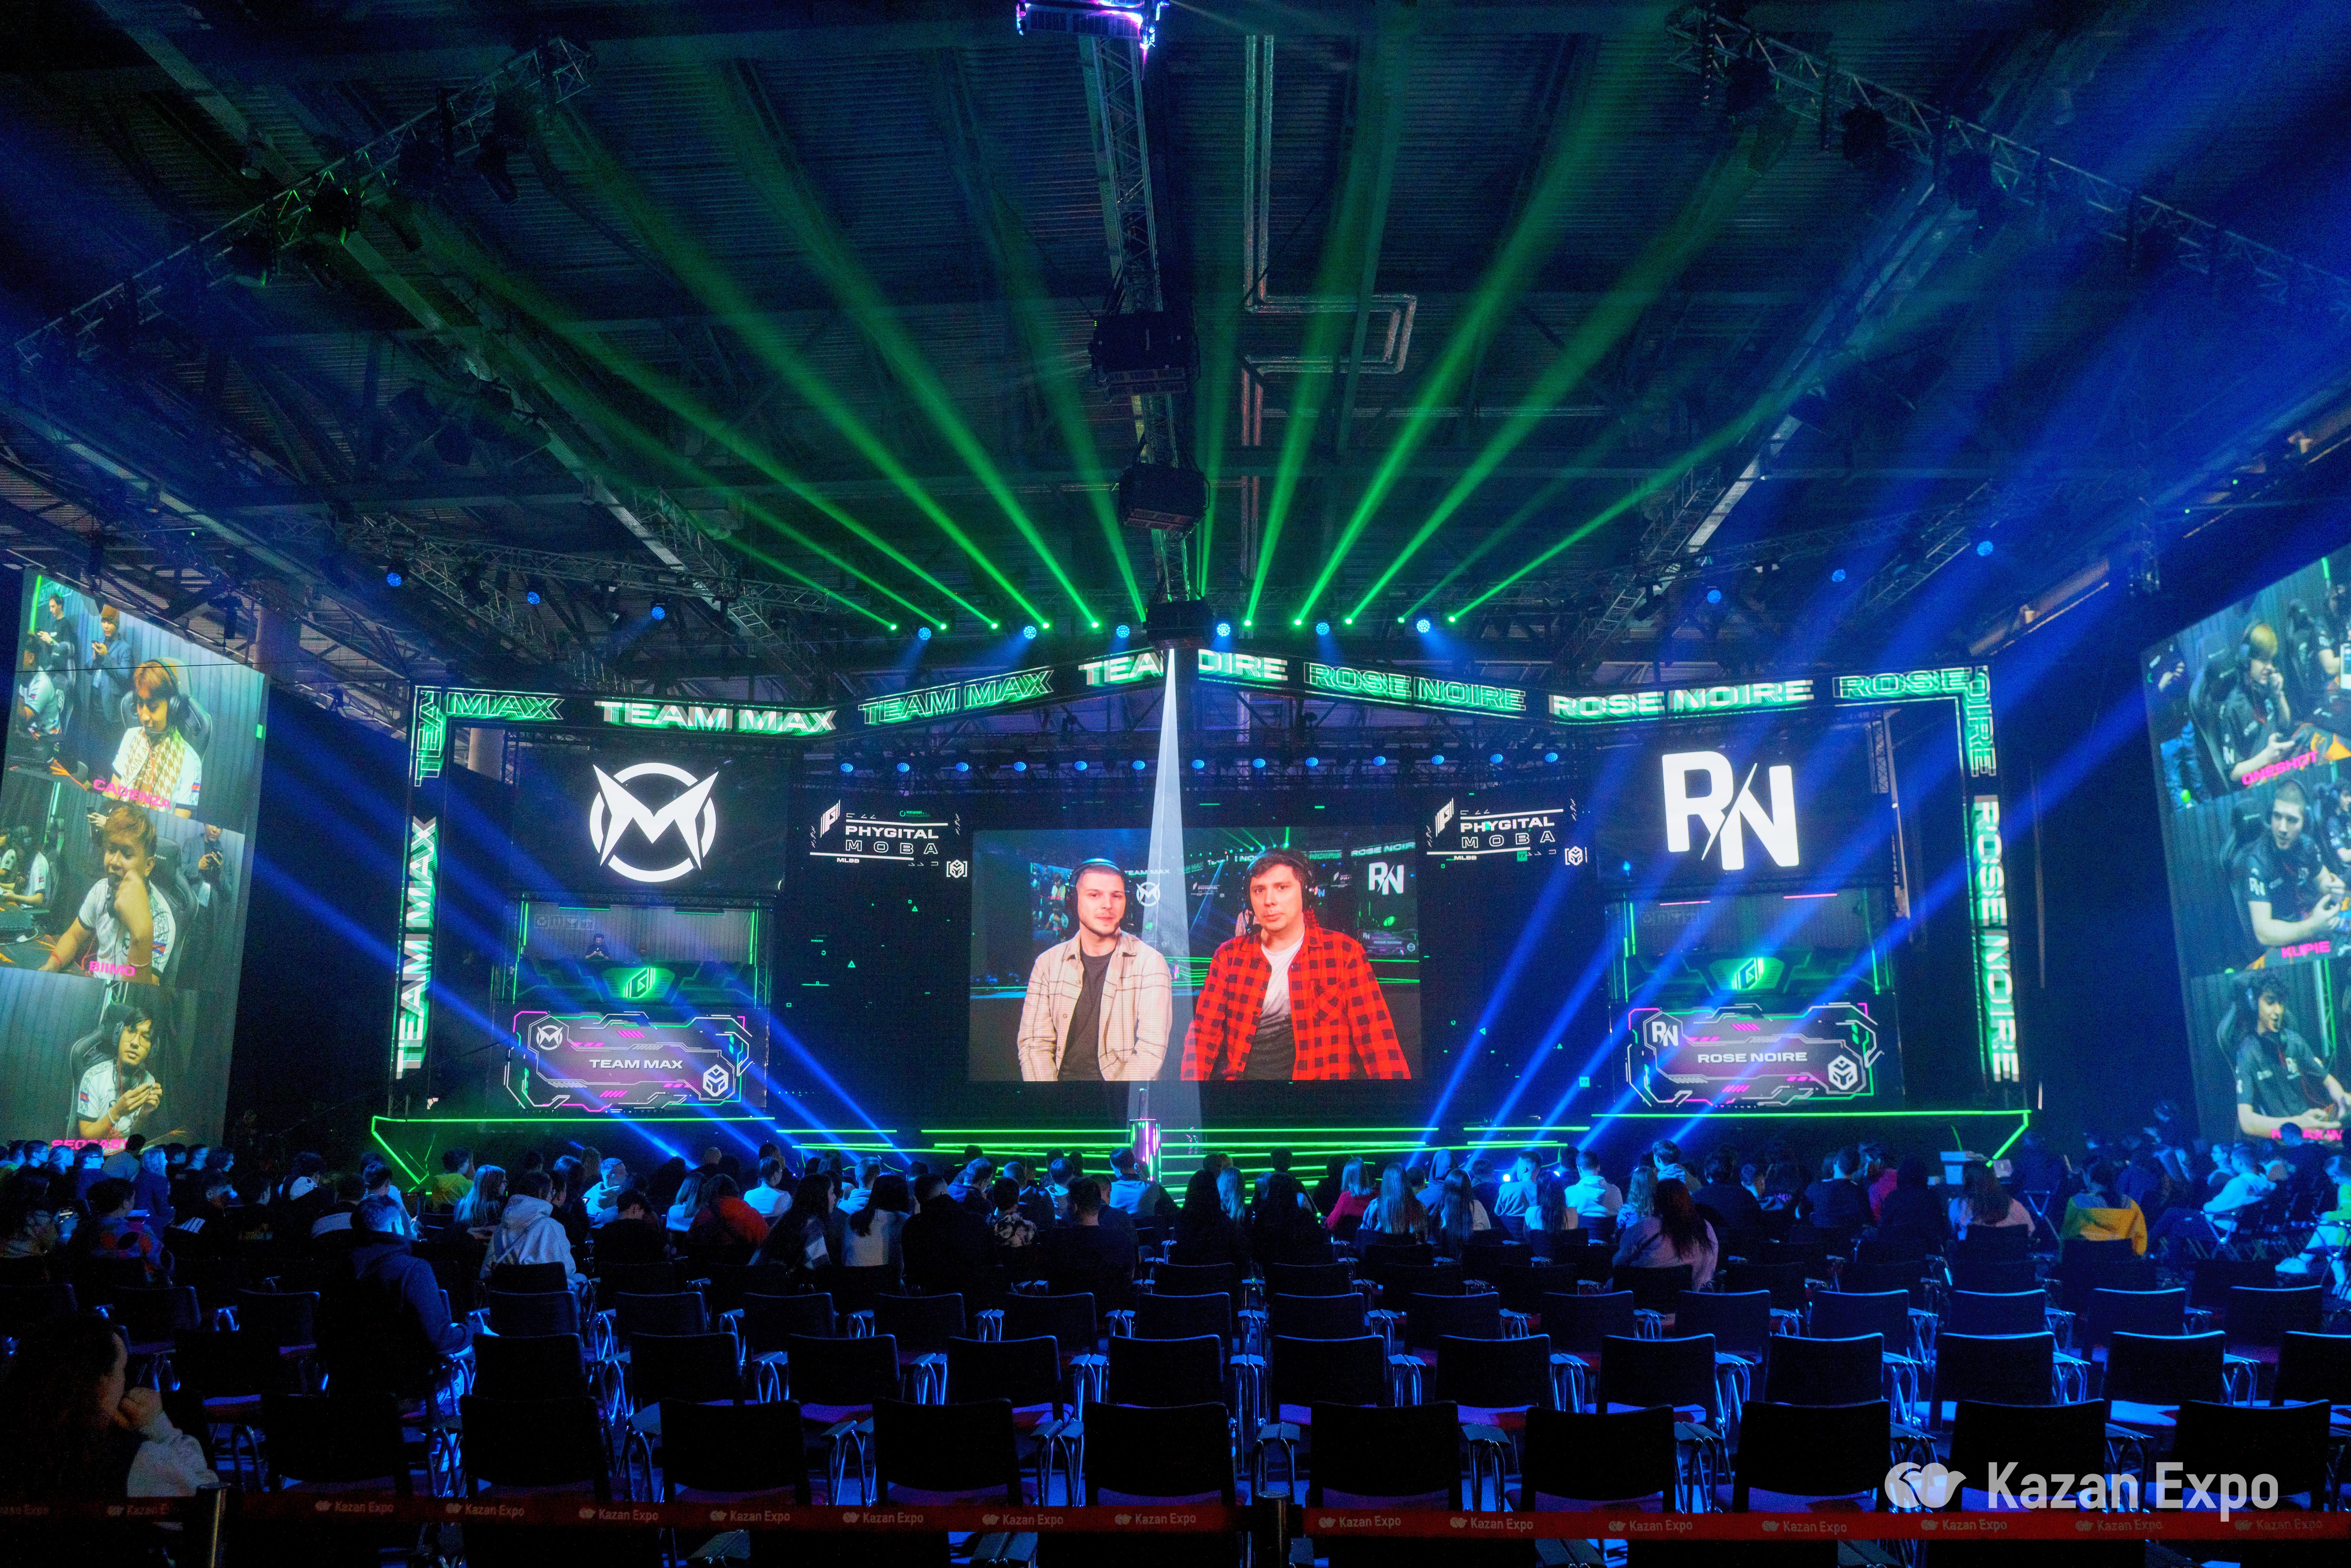 The Kazan Expo arena is illuminated with vibrant green stage lights and large screens displaying team logos, "TEAM MAX" and "ROSE NOIRE", during an esports event. The audience seats are partially filled, with attendees focused on the screens that show live gaming action and commentators discussing the ongoing match. The atmosphere is lively with the excitement of competitive gaming.